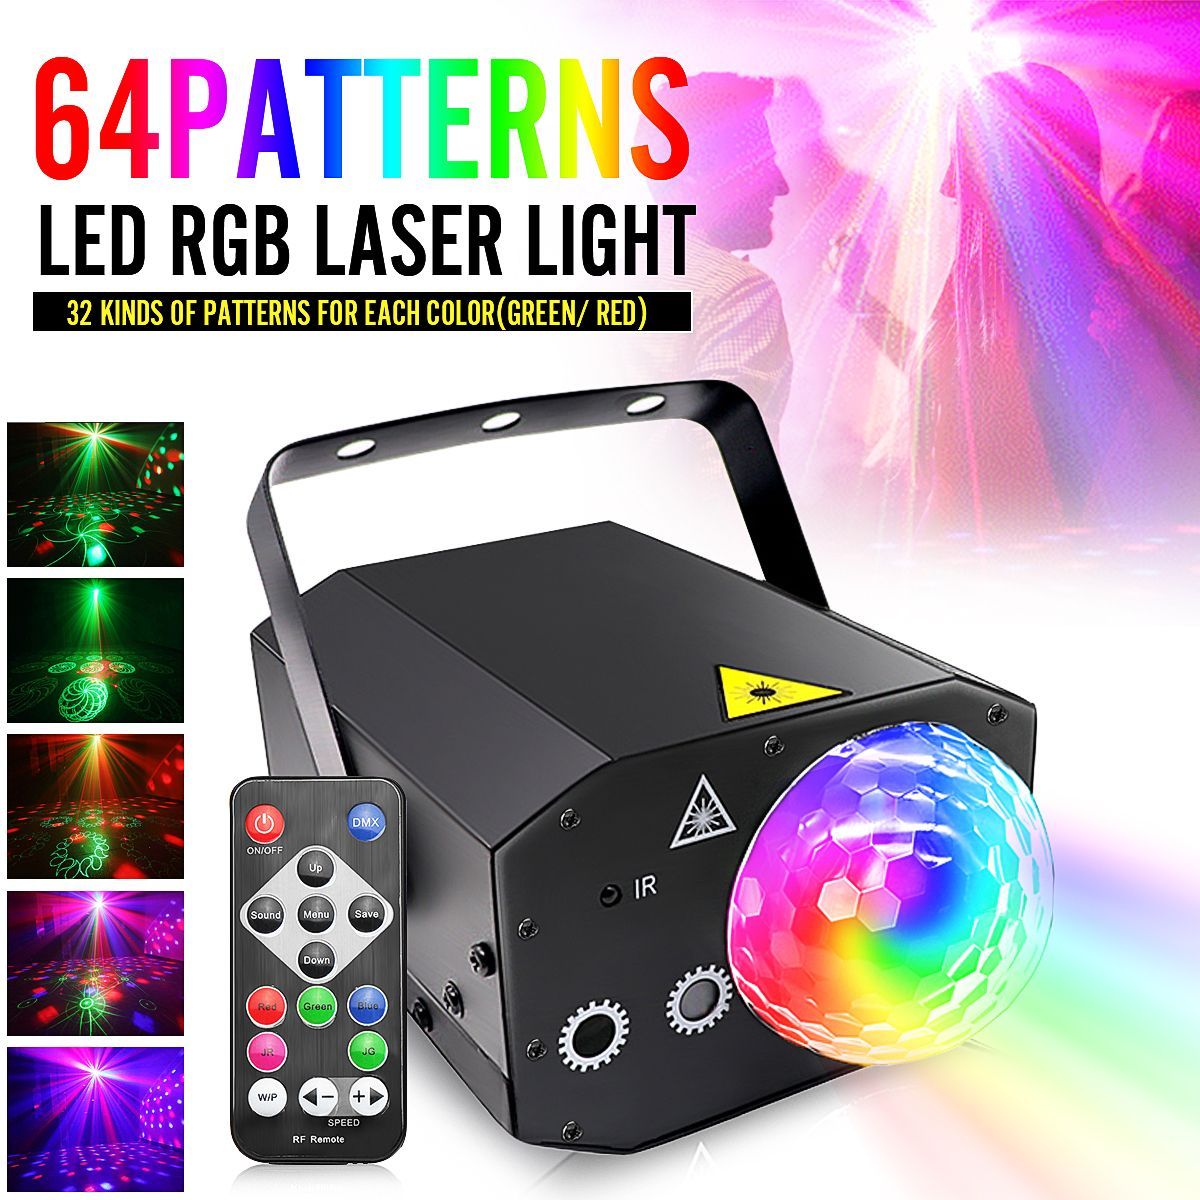 Mini-Magic-Ball-Laser-Party-Light-Sound-Active-Strobe-Lamp-with-Remote-for-KTV-Party-DJ-Birthday-1660265